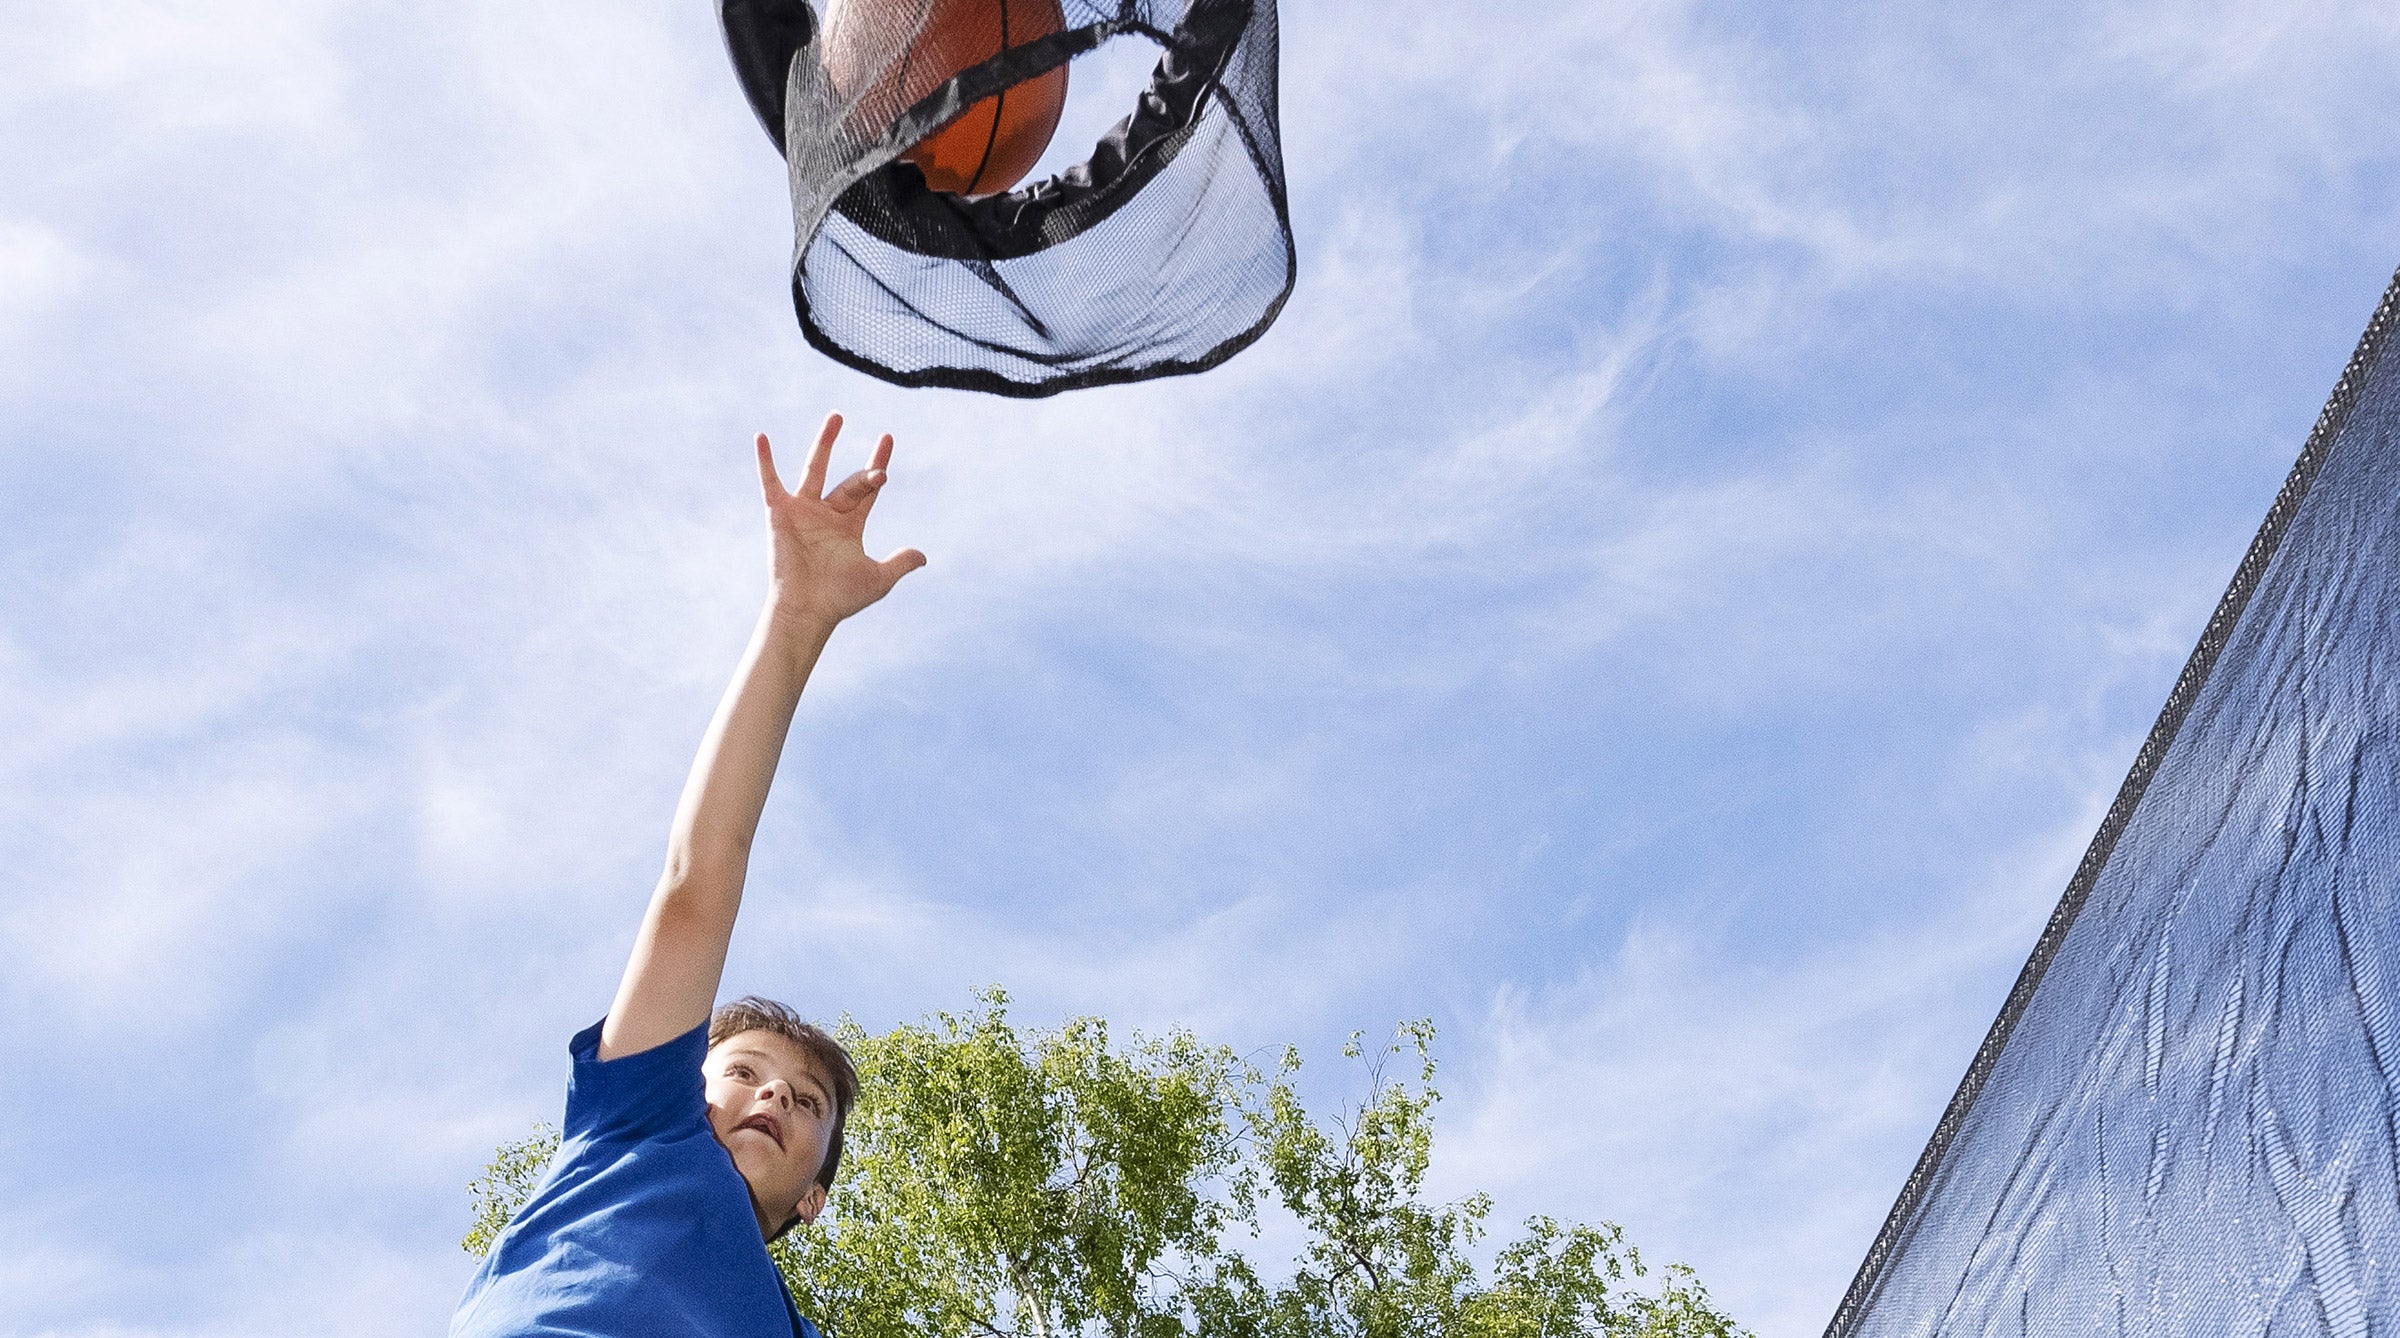 A boy on a trampoline jumping and throwing a basketball into the hoop.